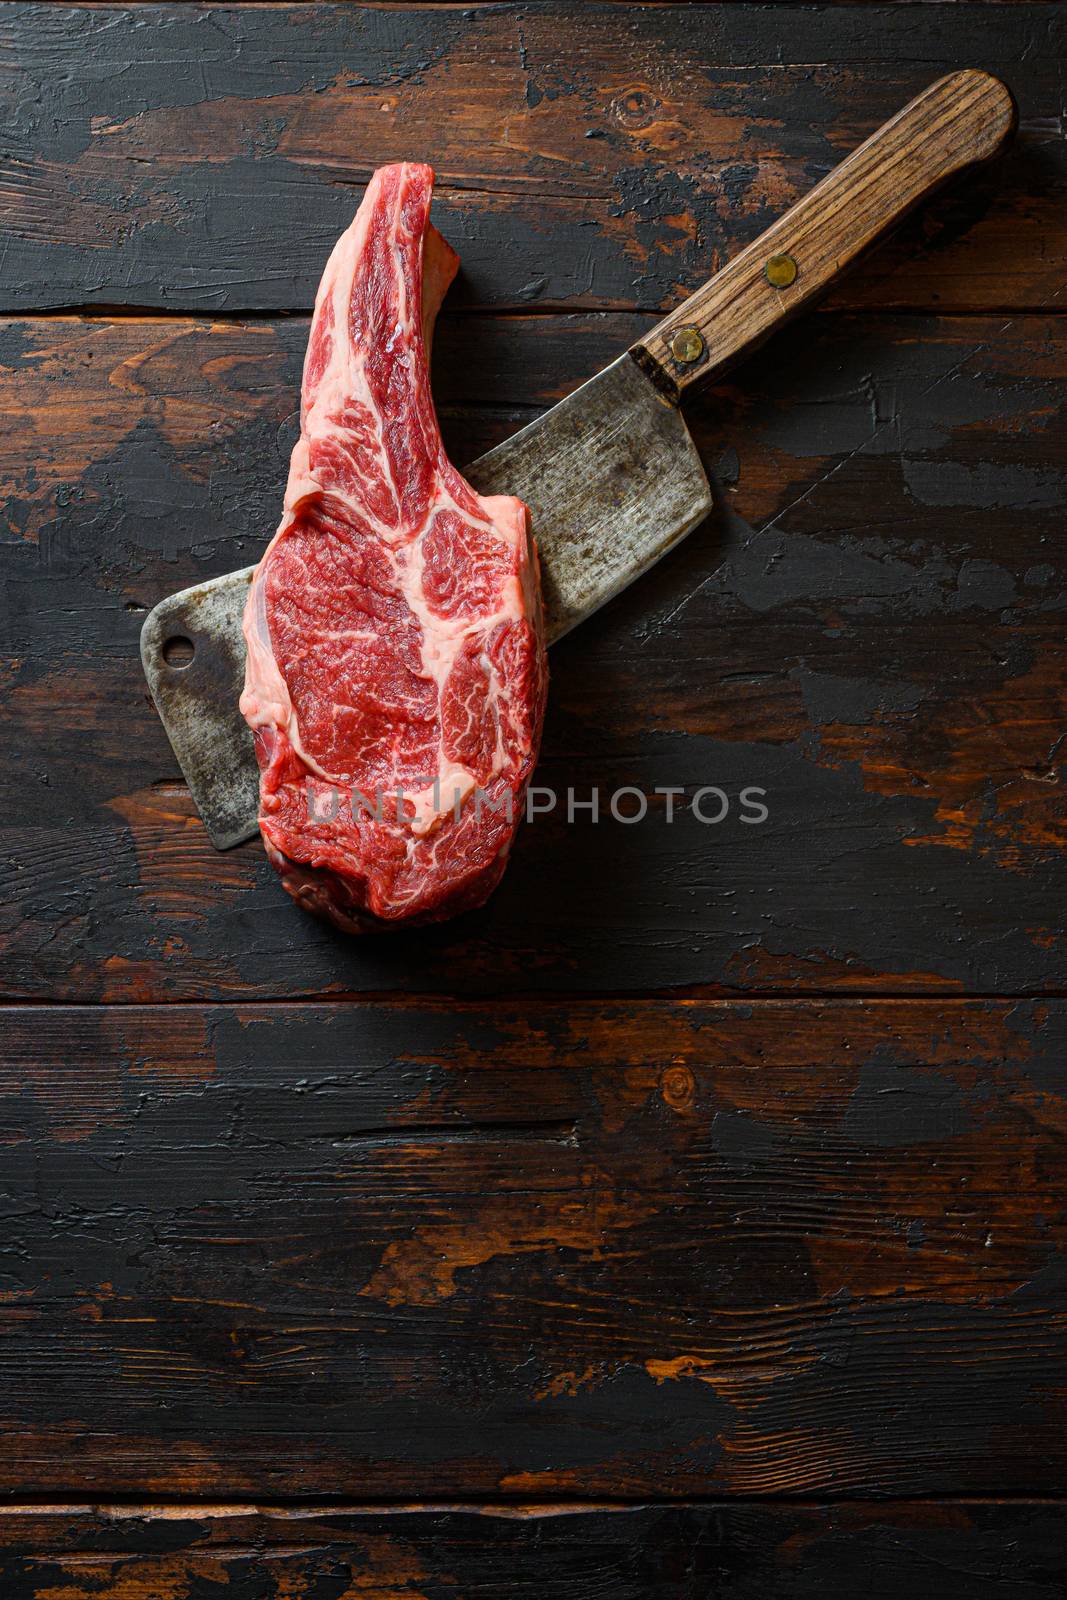 Raw Scotch Fillet steak on meat cleaver. Organic beef. Dark wooden background. Top view. Copy space. Nobody Noone. by Ilianesolenyi